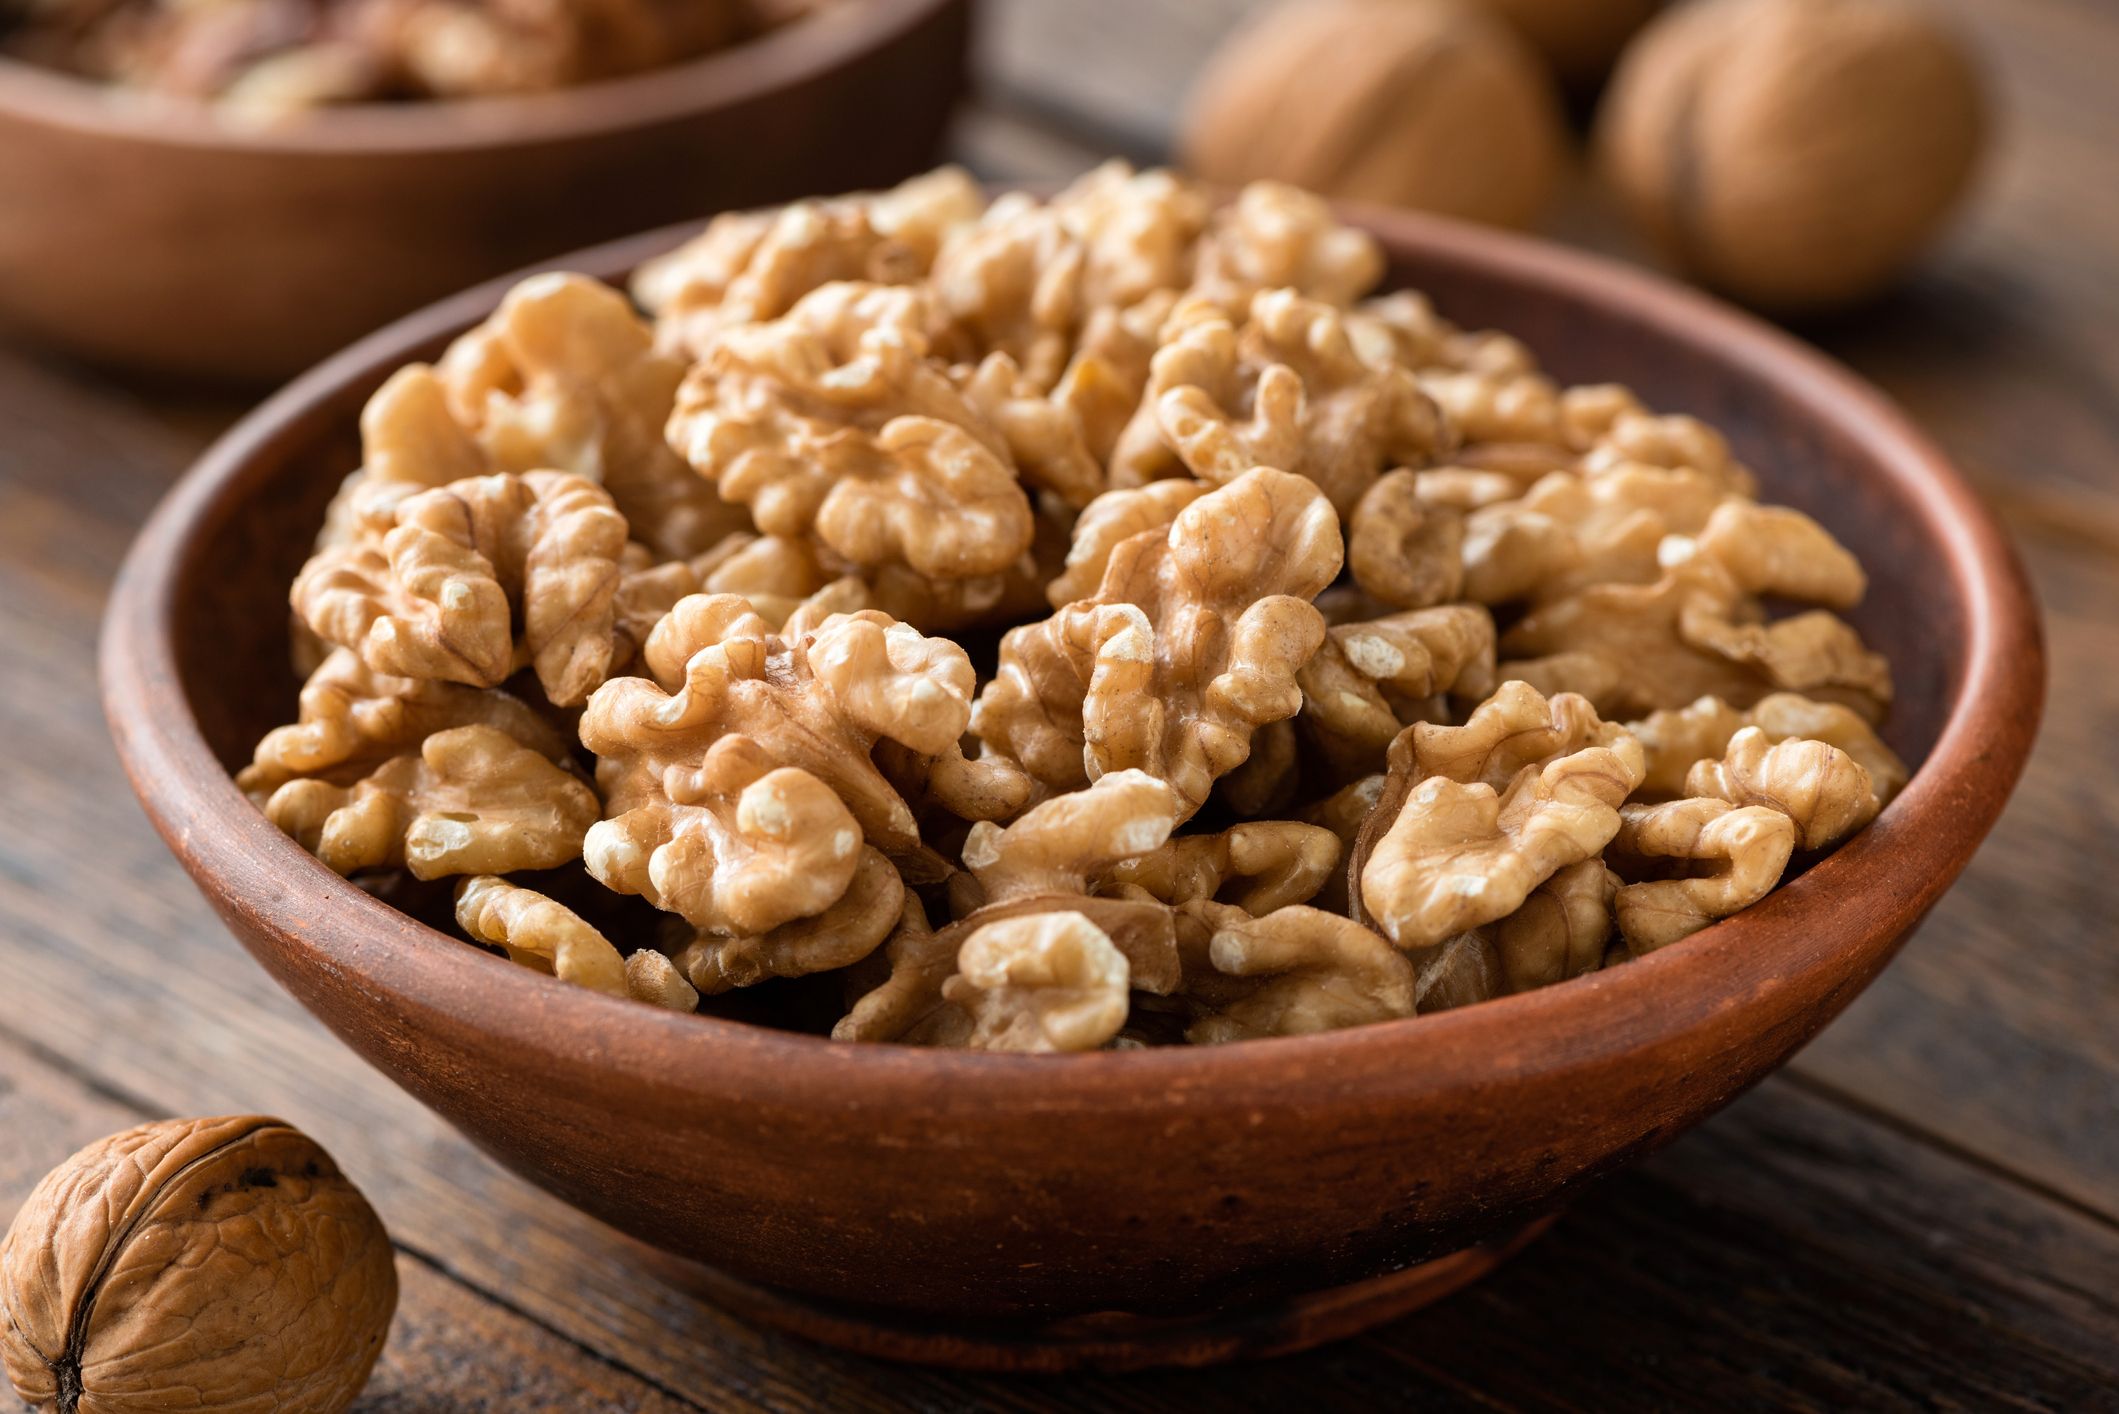 https://hips.hearstapps.com/hmg-prod/images/walnuts-in-brown-bowl-on-wooden-table-royalty-free-image-1682000396.jpg